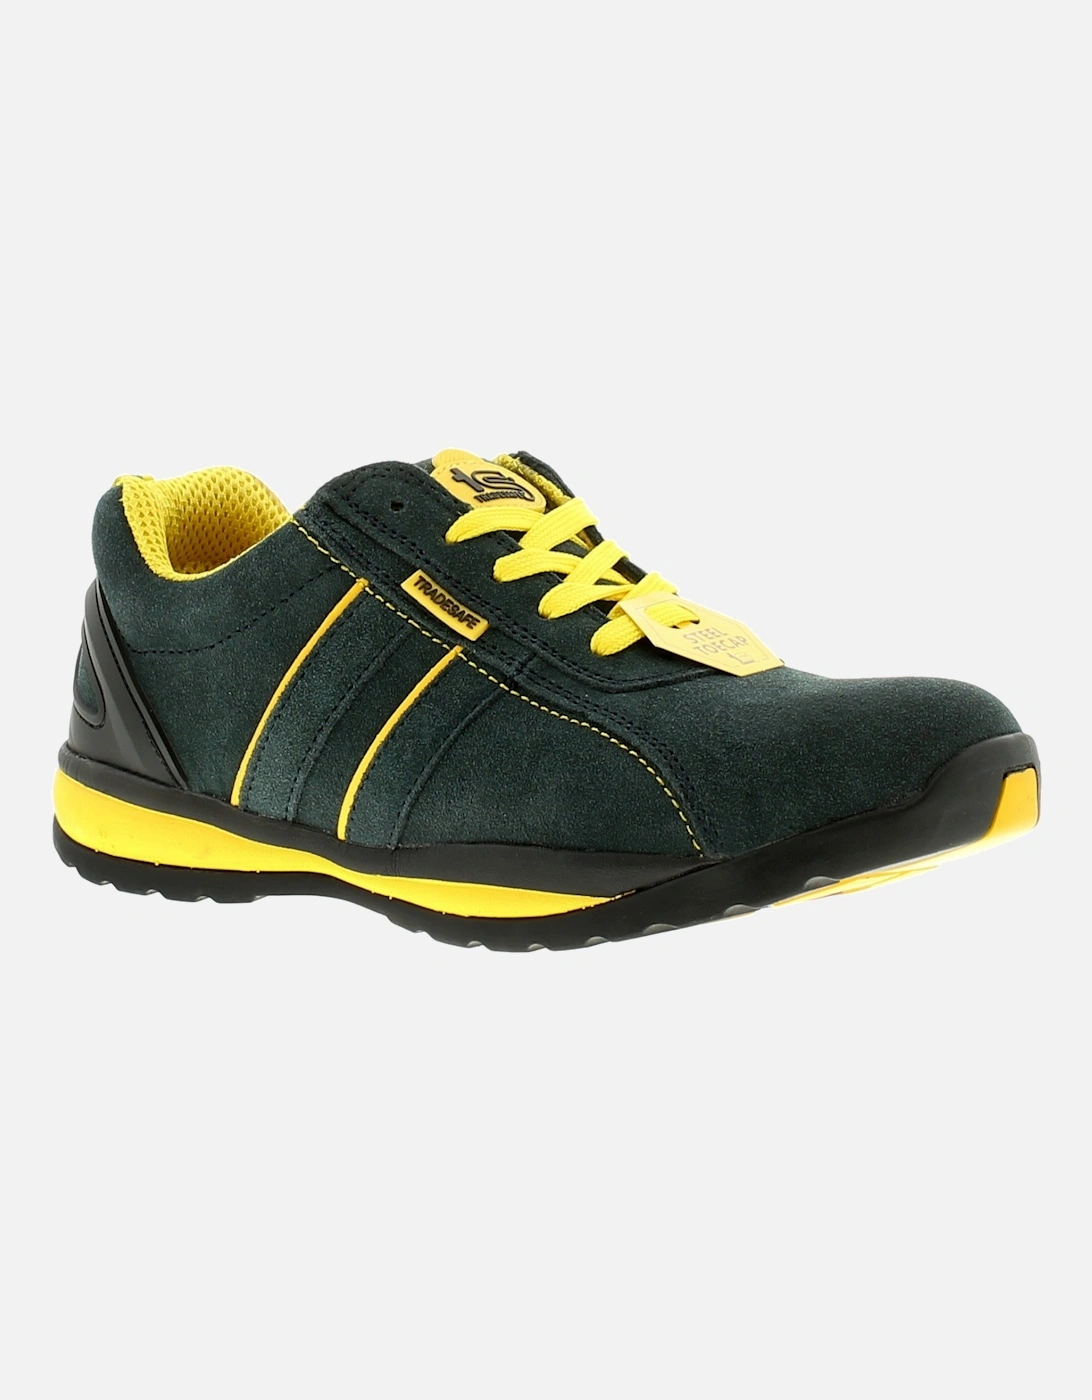 Mens Safety Shoes Trainers Barge Leather Lace Up navy yellow UK Size, 6 of 5